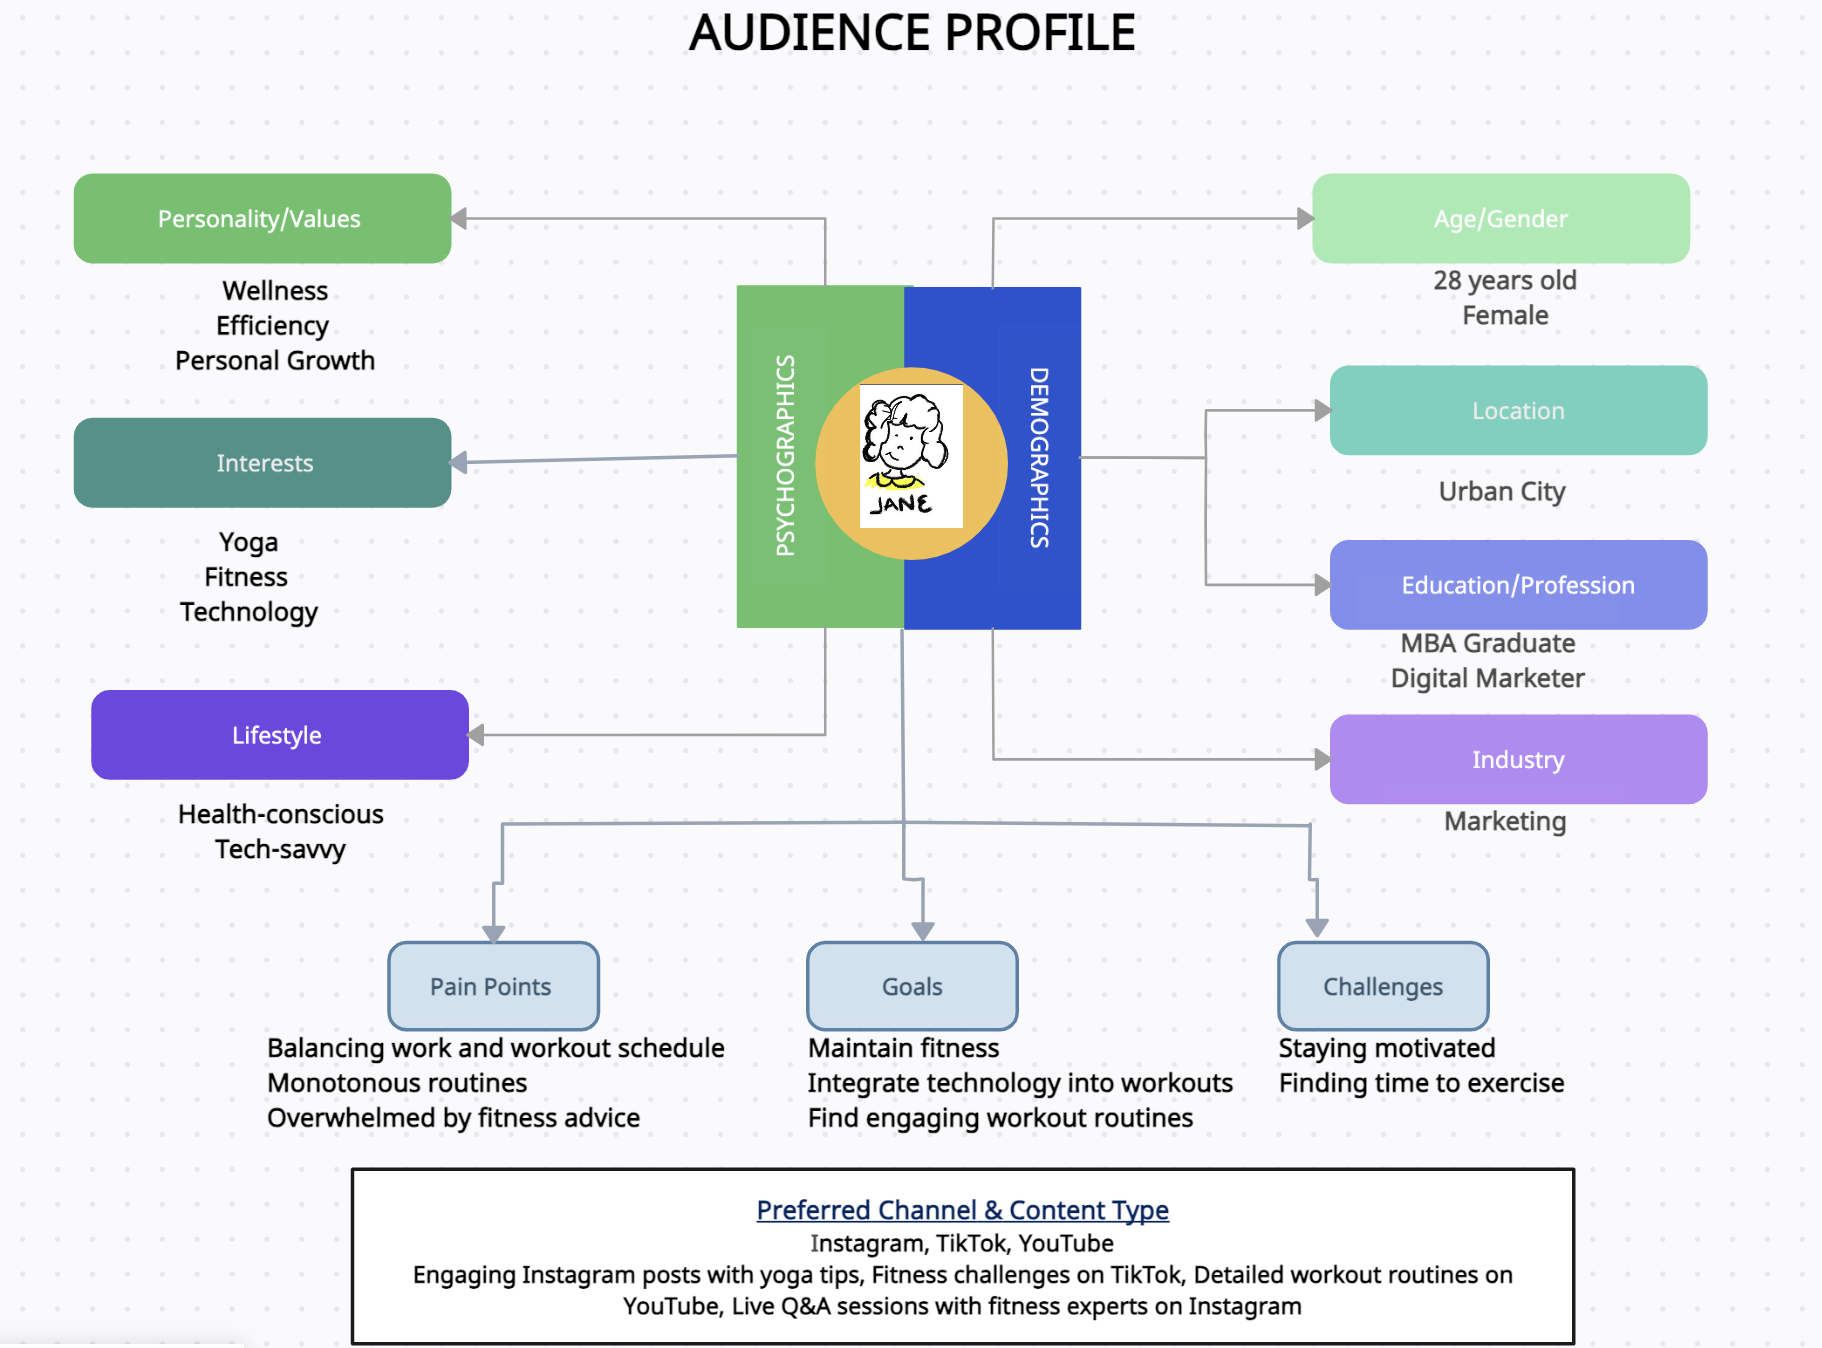 Audience Profile example